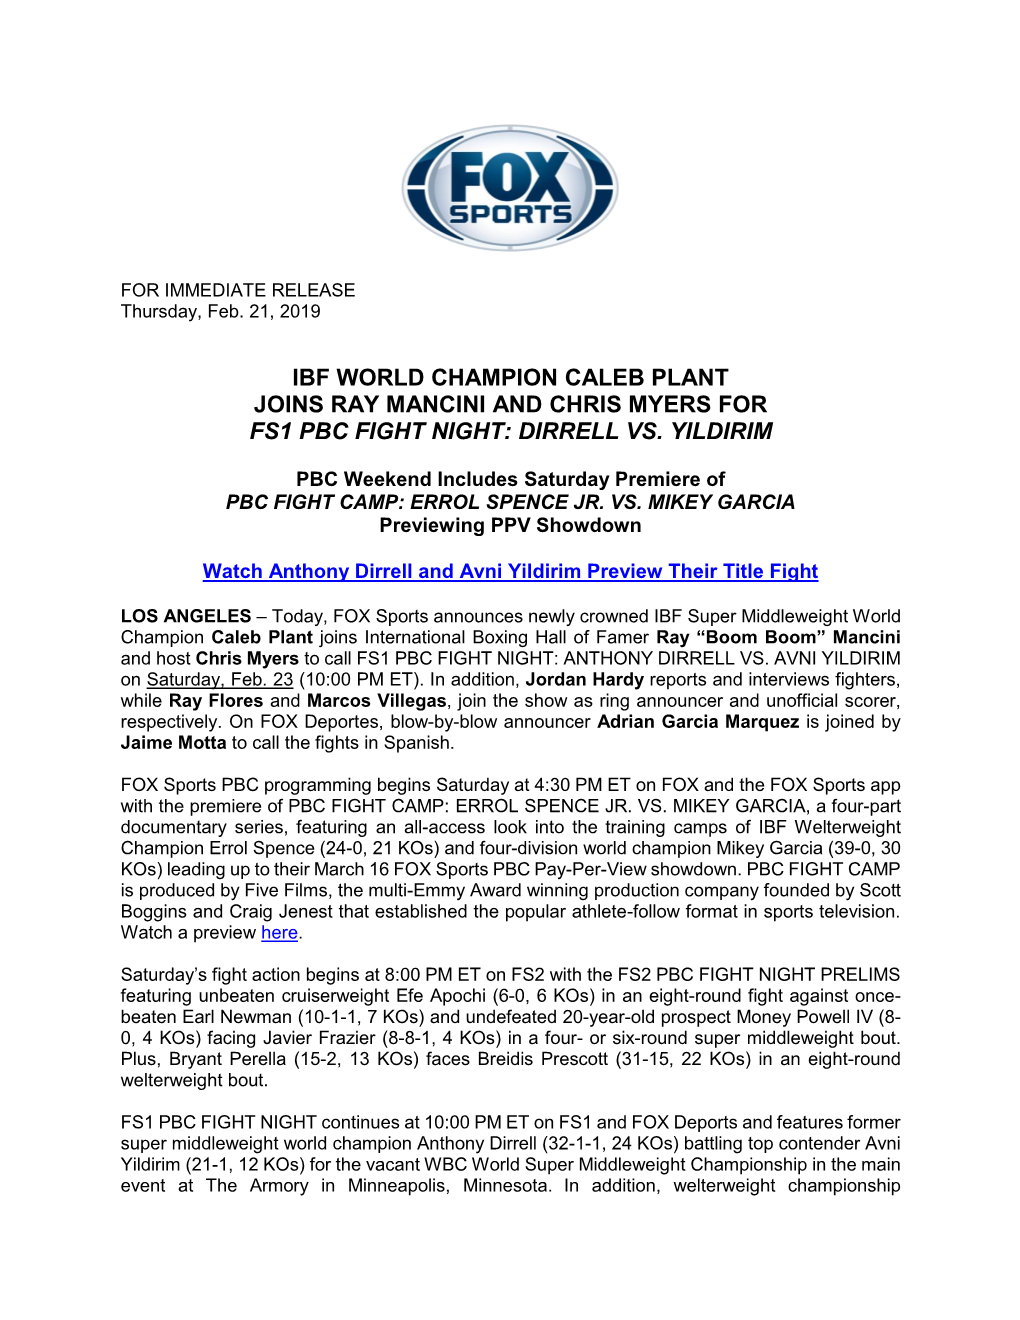 Ibf World Champion Caleb Plant Joins Ray Mancini and Chris Myers for Fs1 Pbc Fight Night: Dirrell Vs